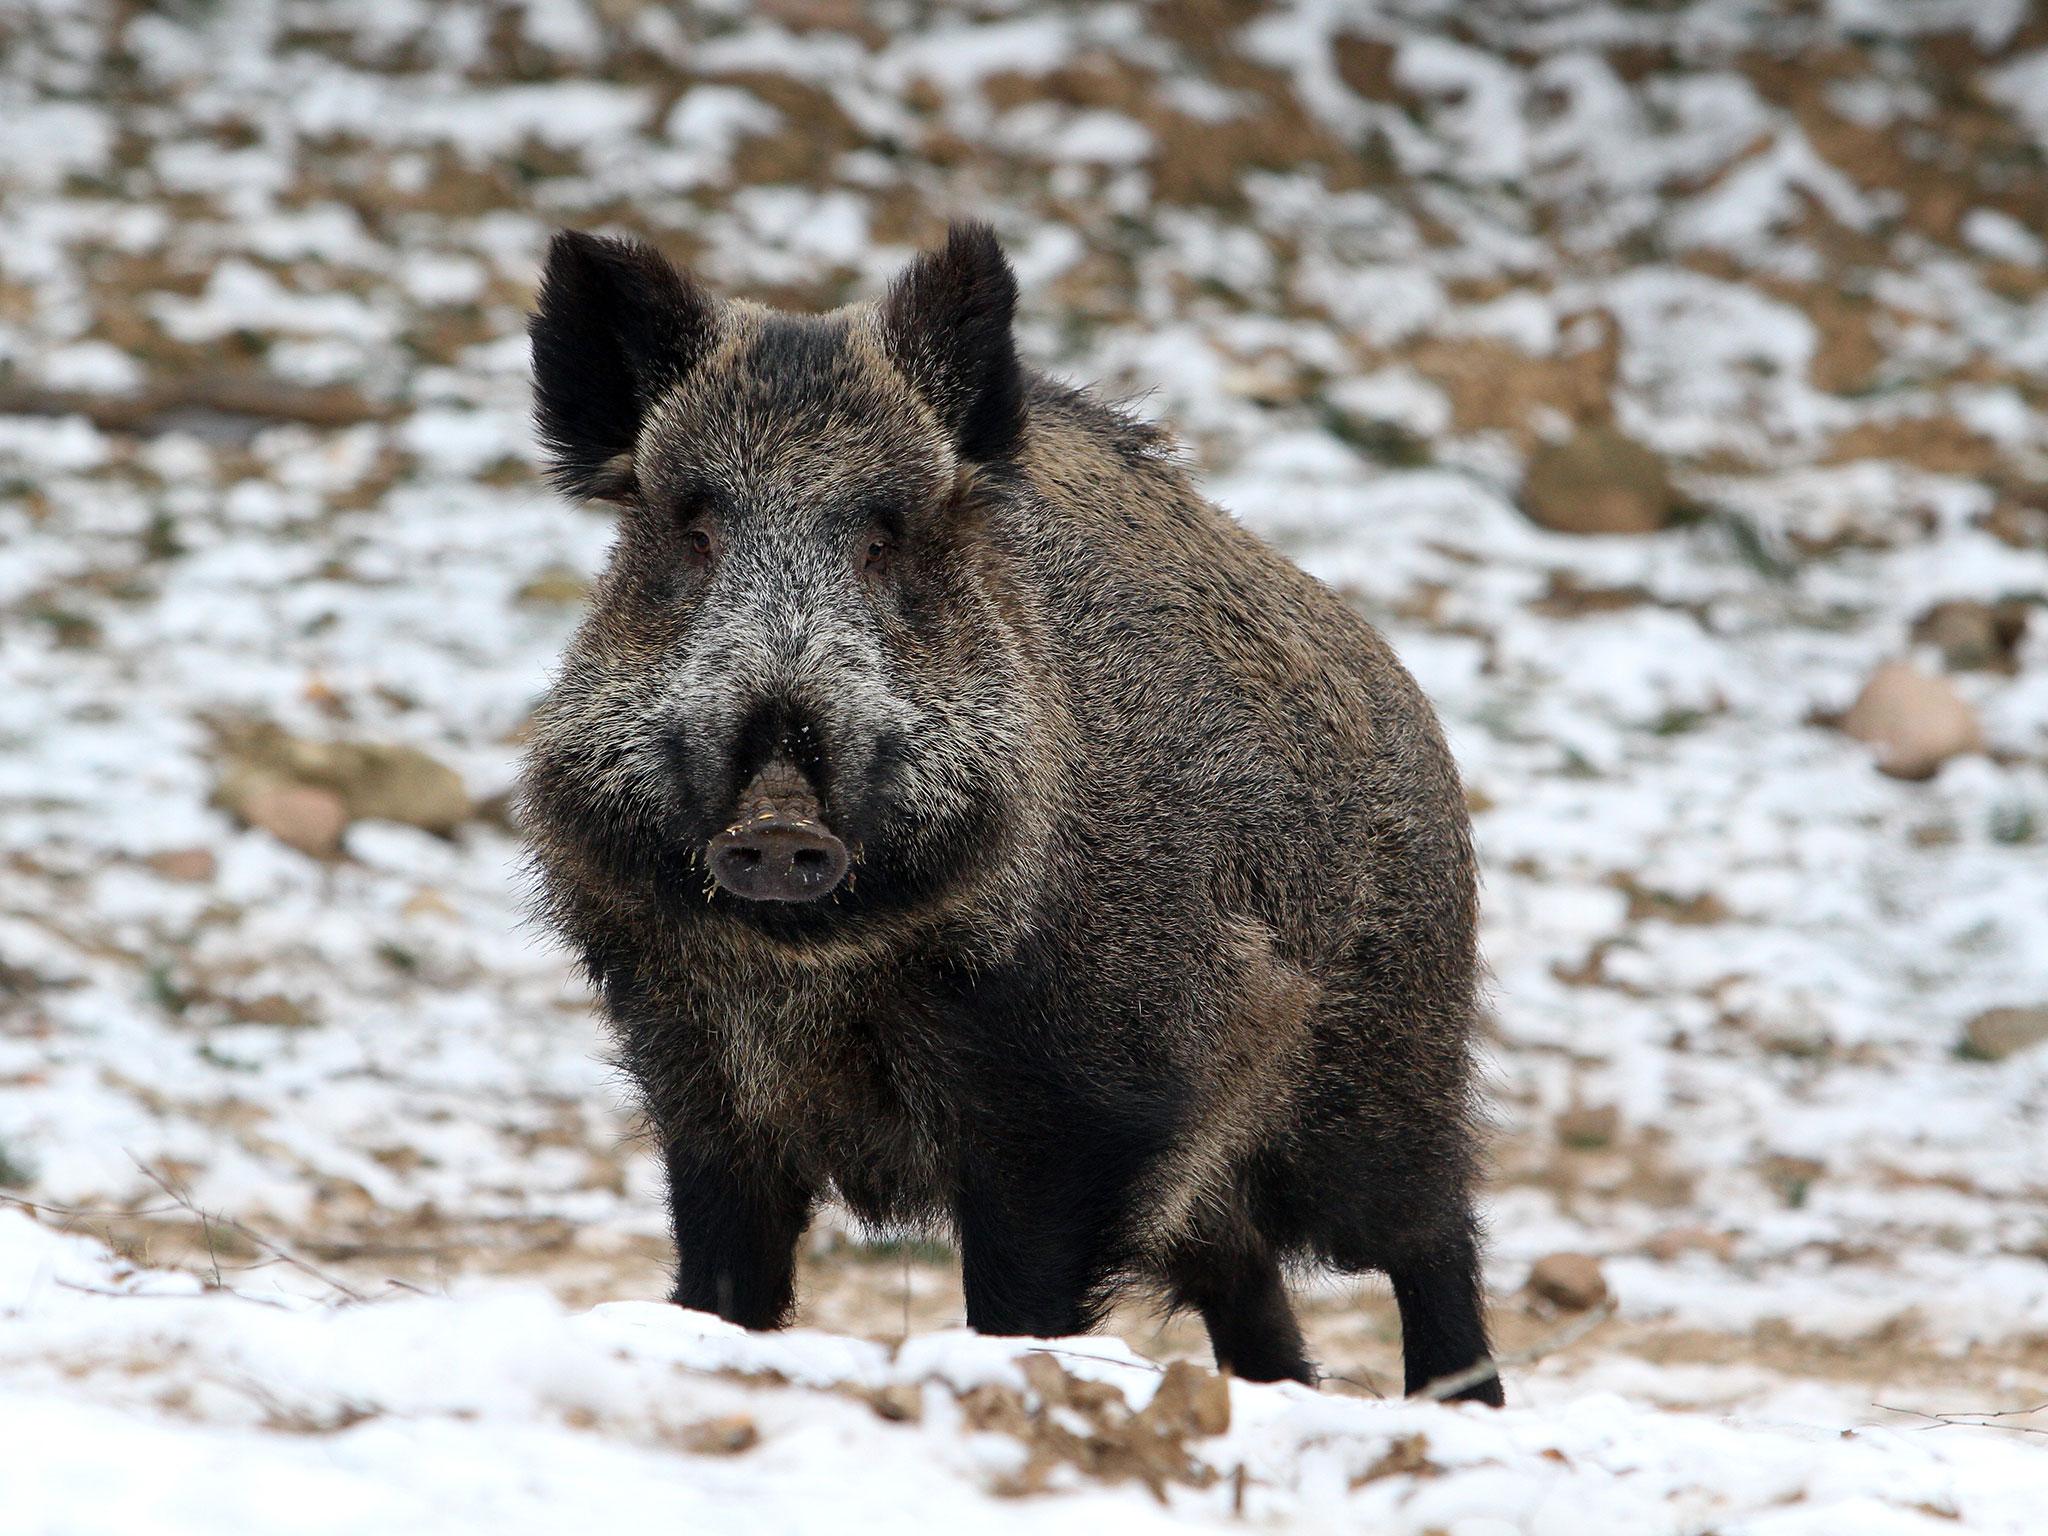 The boar's whereabouts are unknown and it wasn't clear if the animal was injured, police said